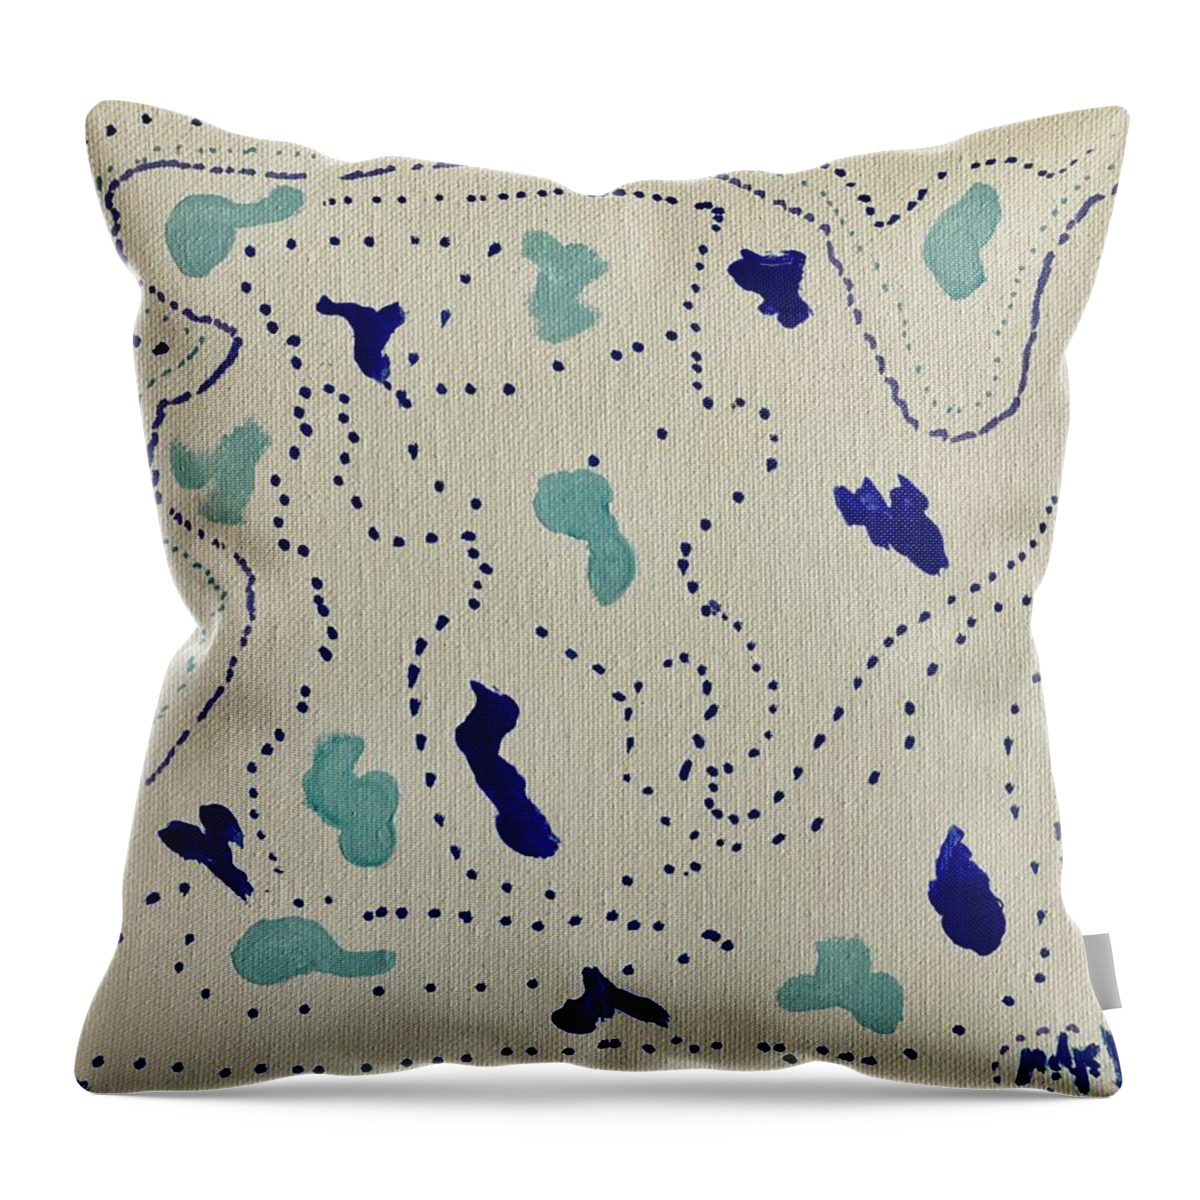 Arcturians Throw Pillow featuring the painting The Arcturians by Medge Jaspan